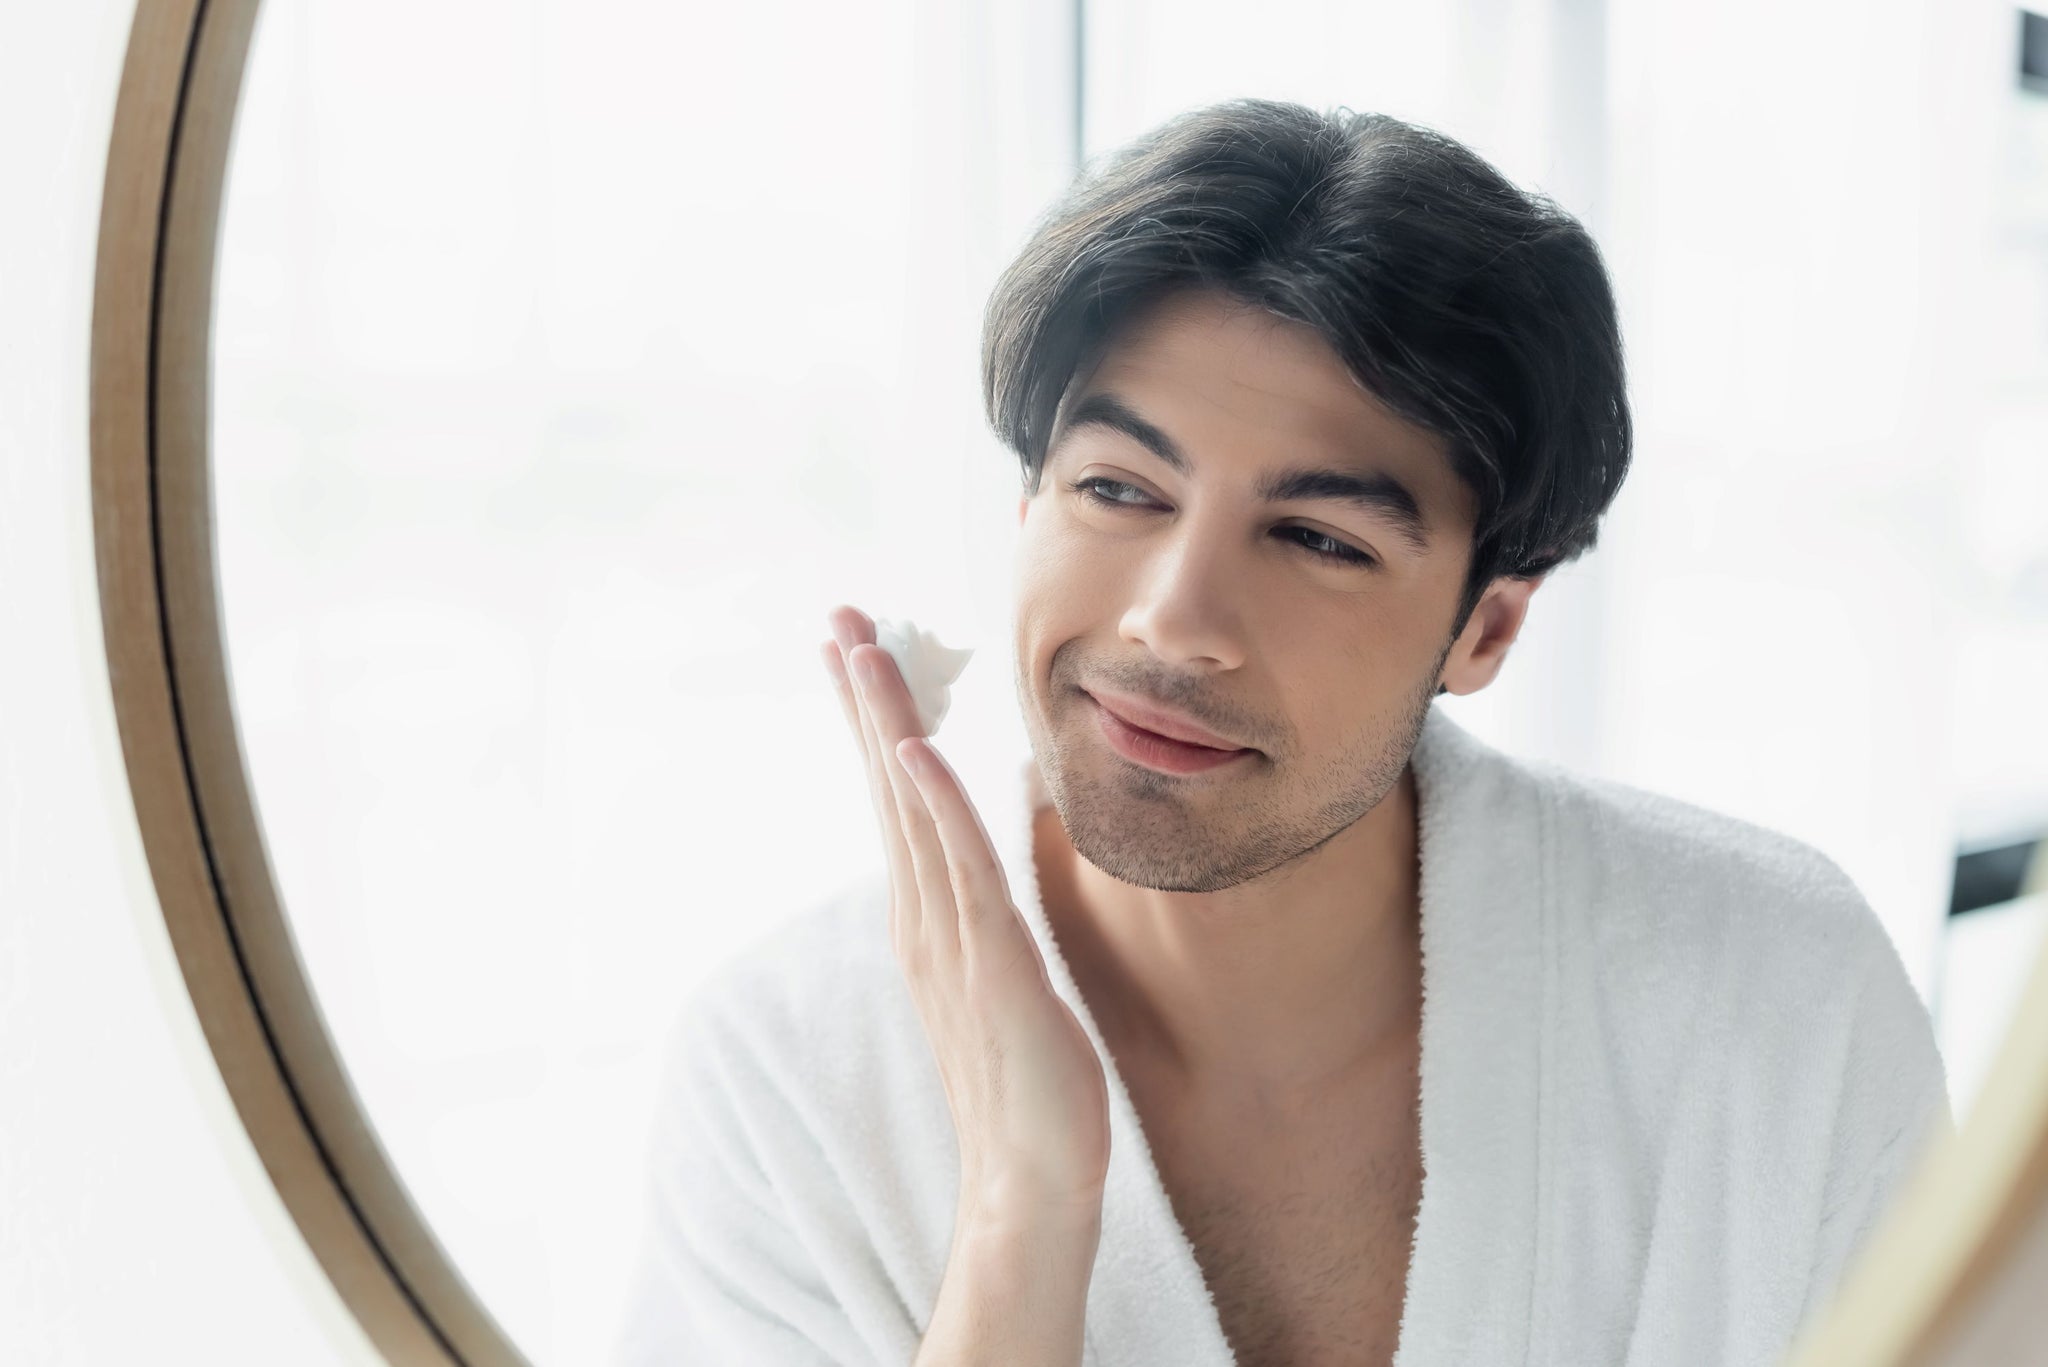 Beyond Grooming: How a Proper Skincare and Haircare Routine Contributes to Overall Well-Being